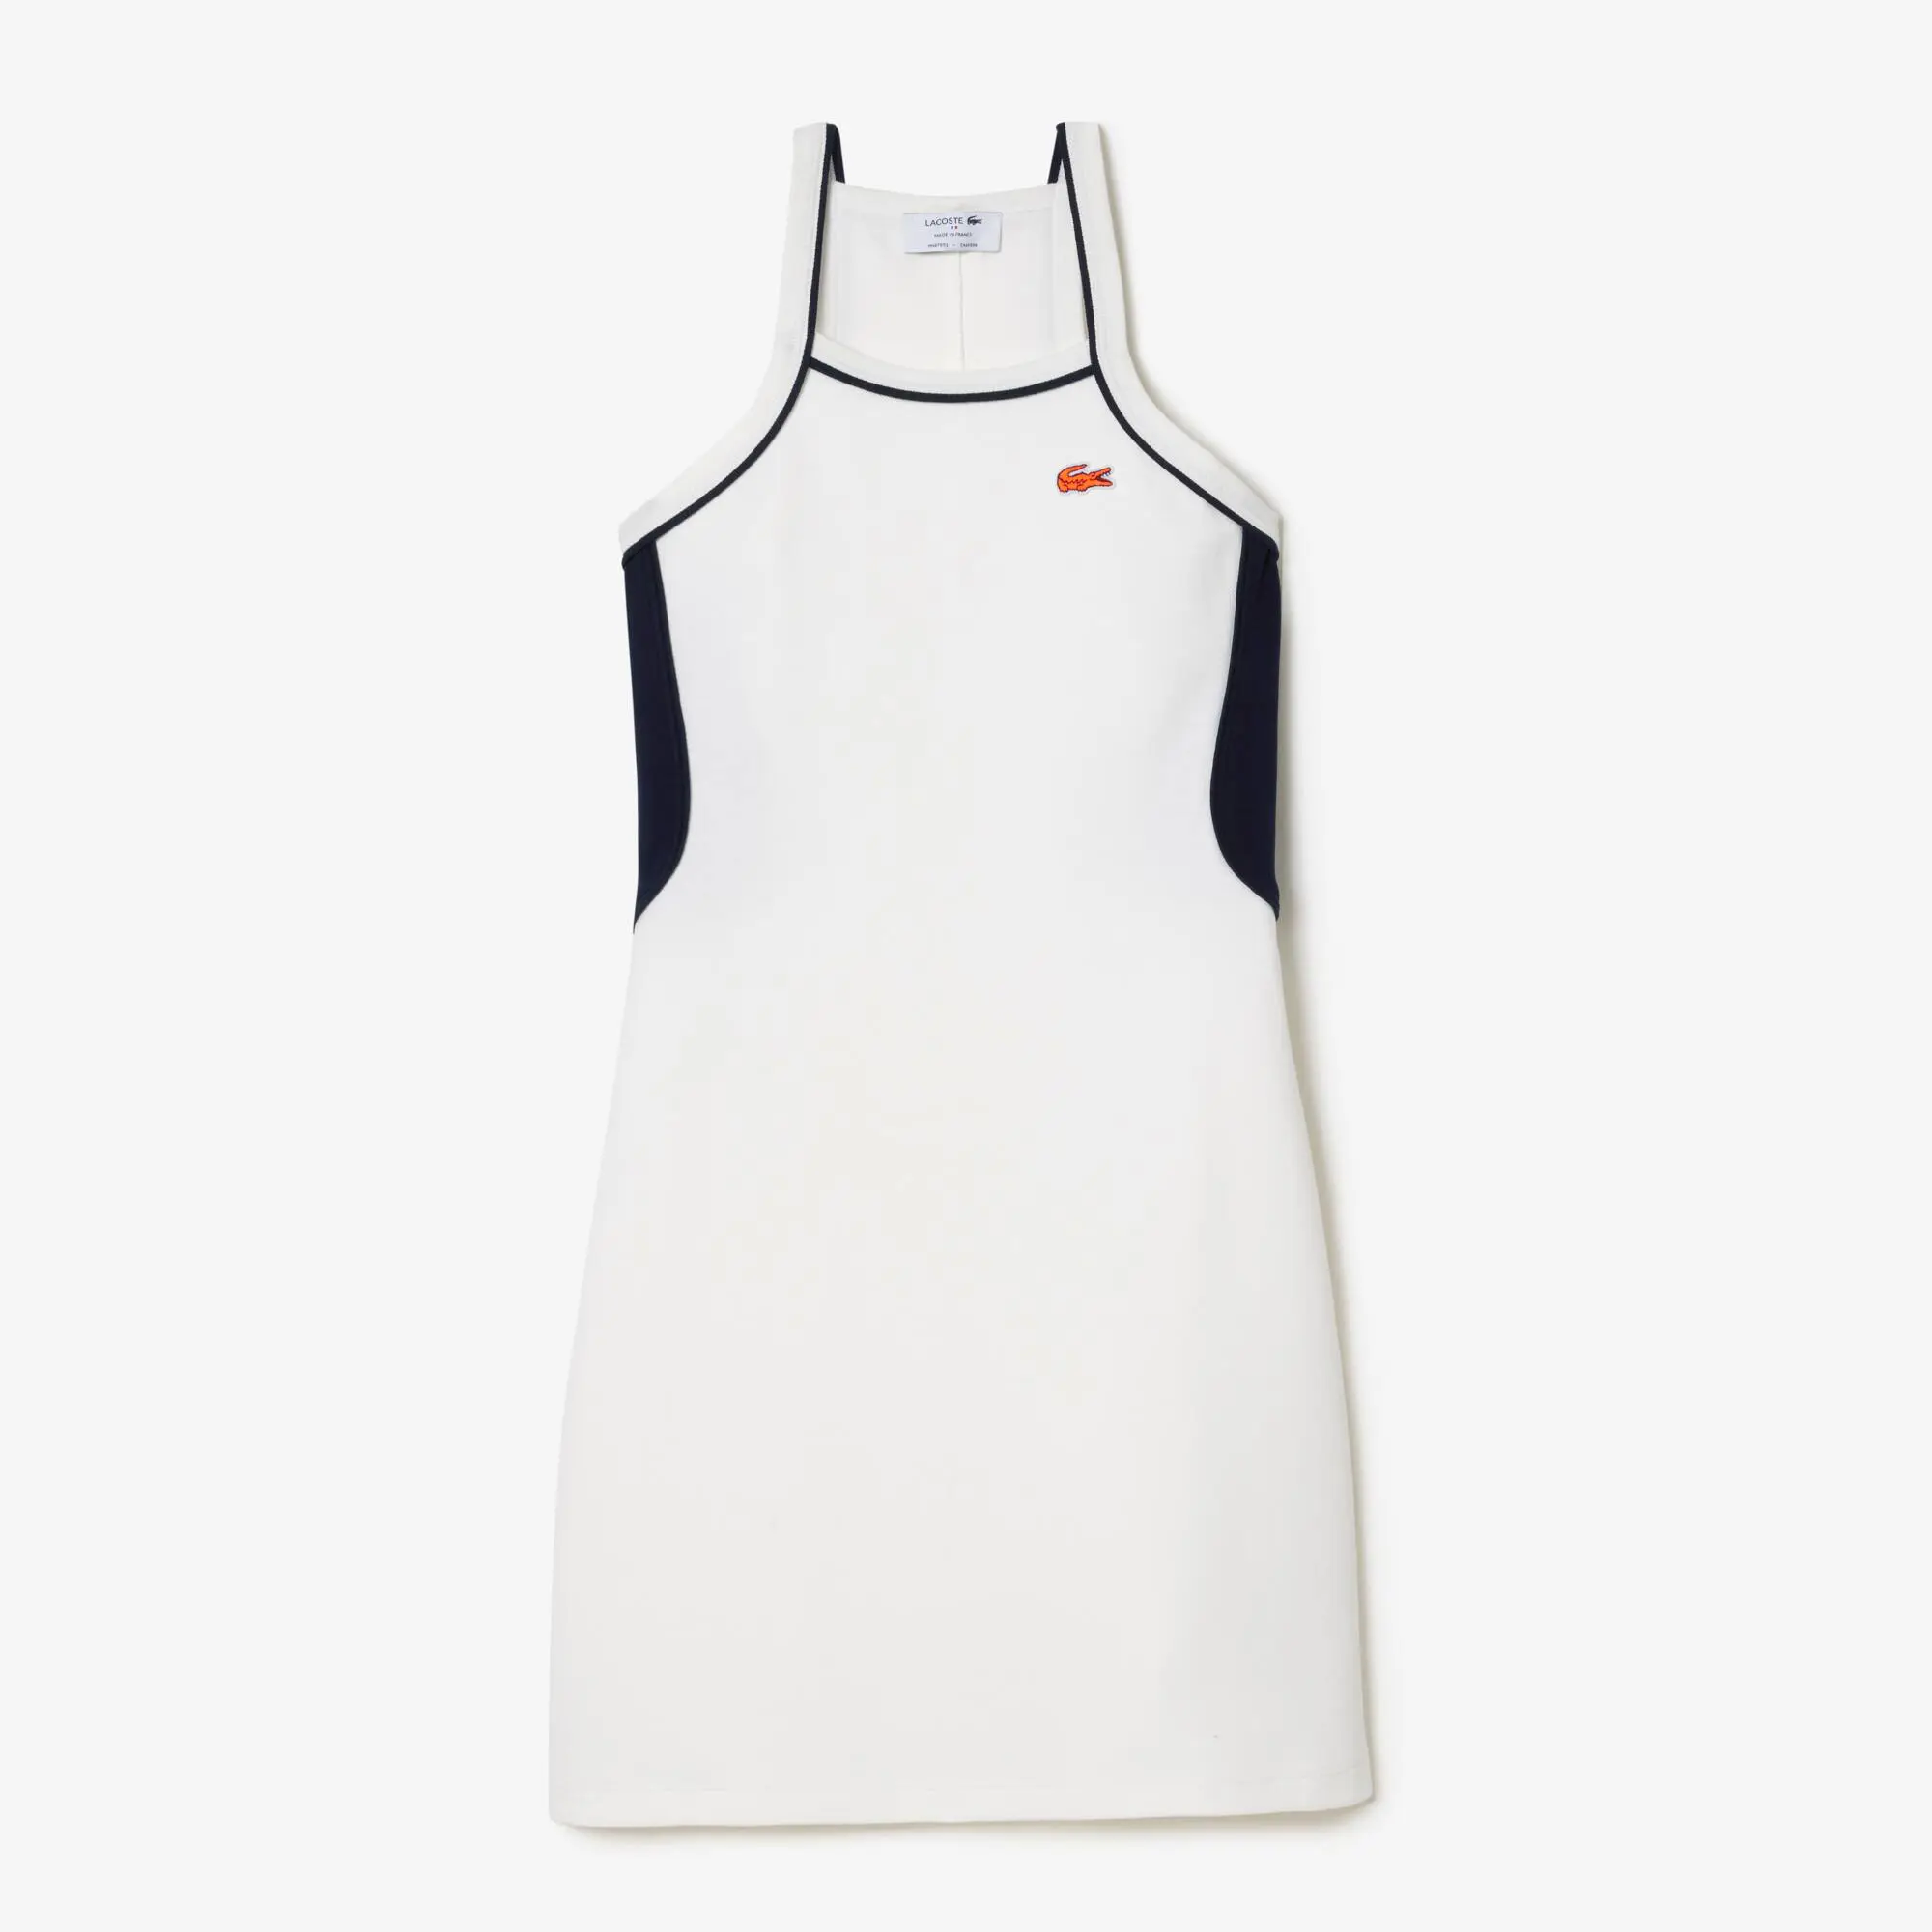 Lacoste Women’s Lacoste Organic Cotton French Made Tennis Dress. 2